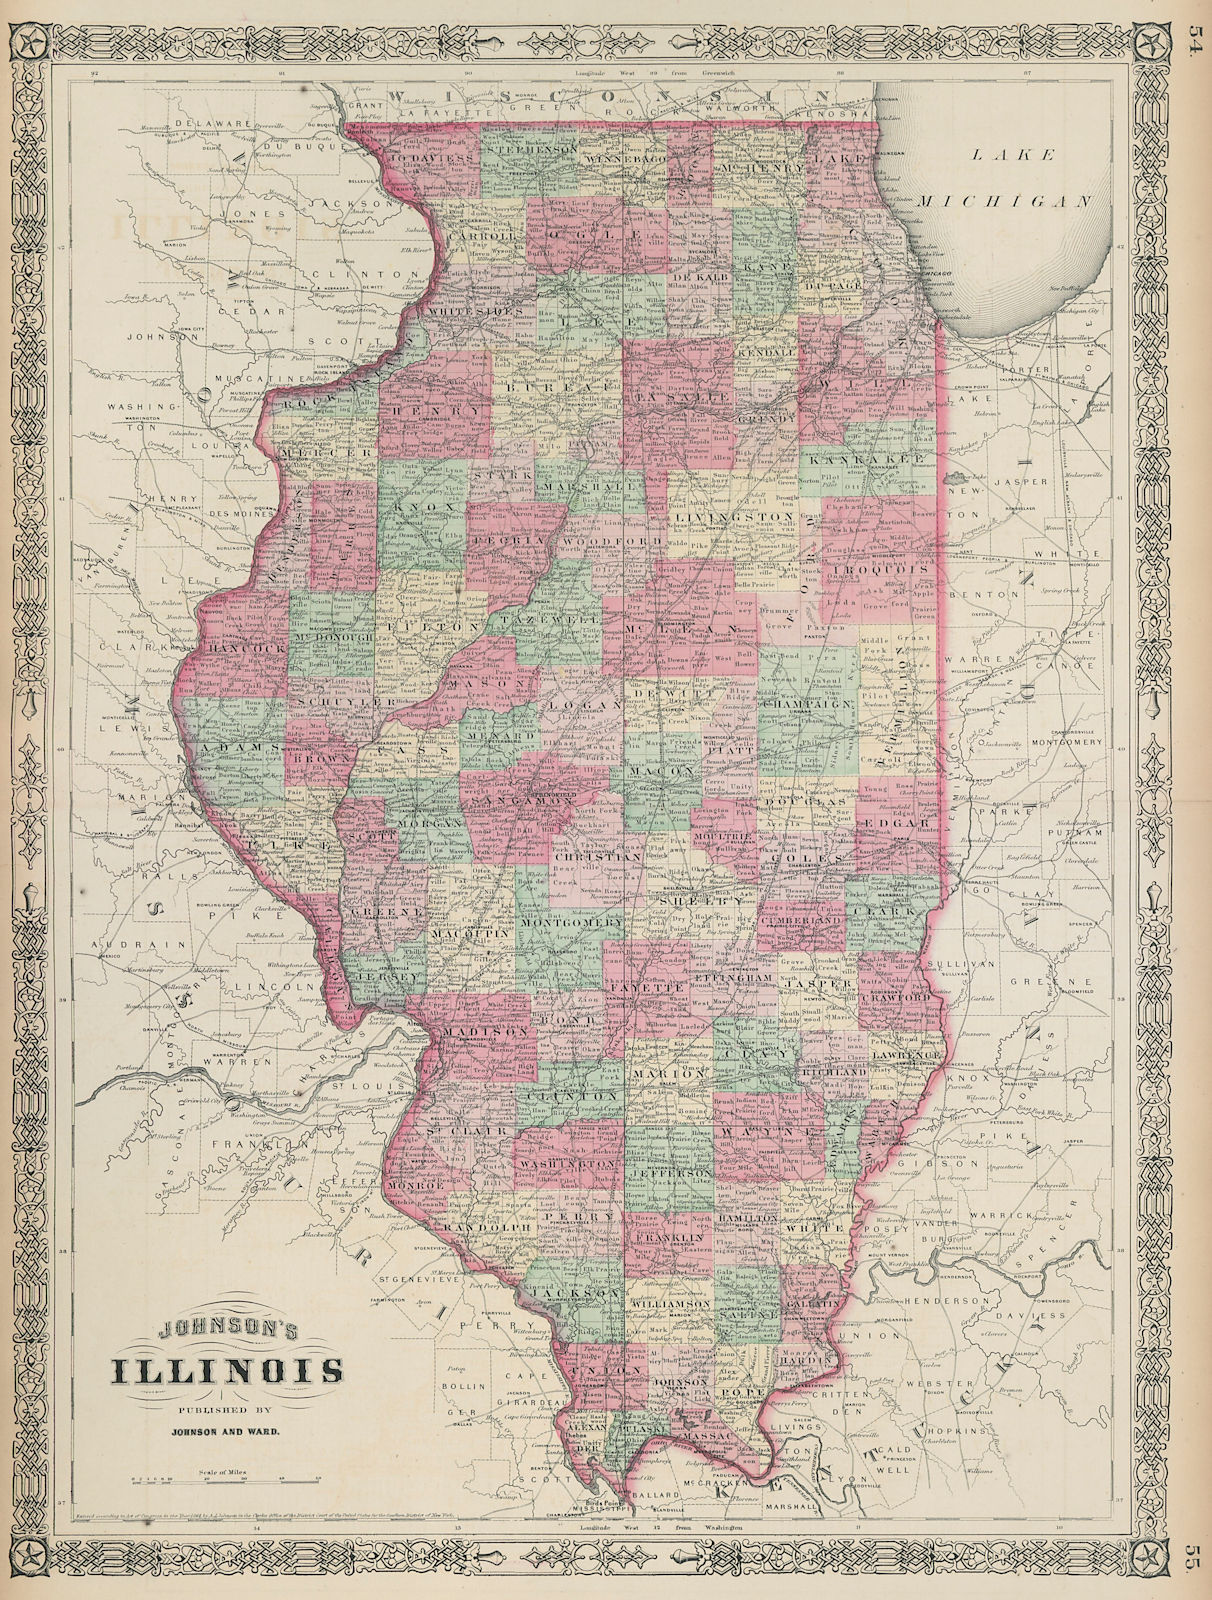 Johnson's Illinois. US state map showing counties 1865 old antique chart